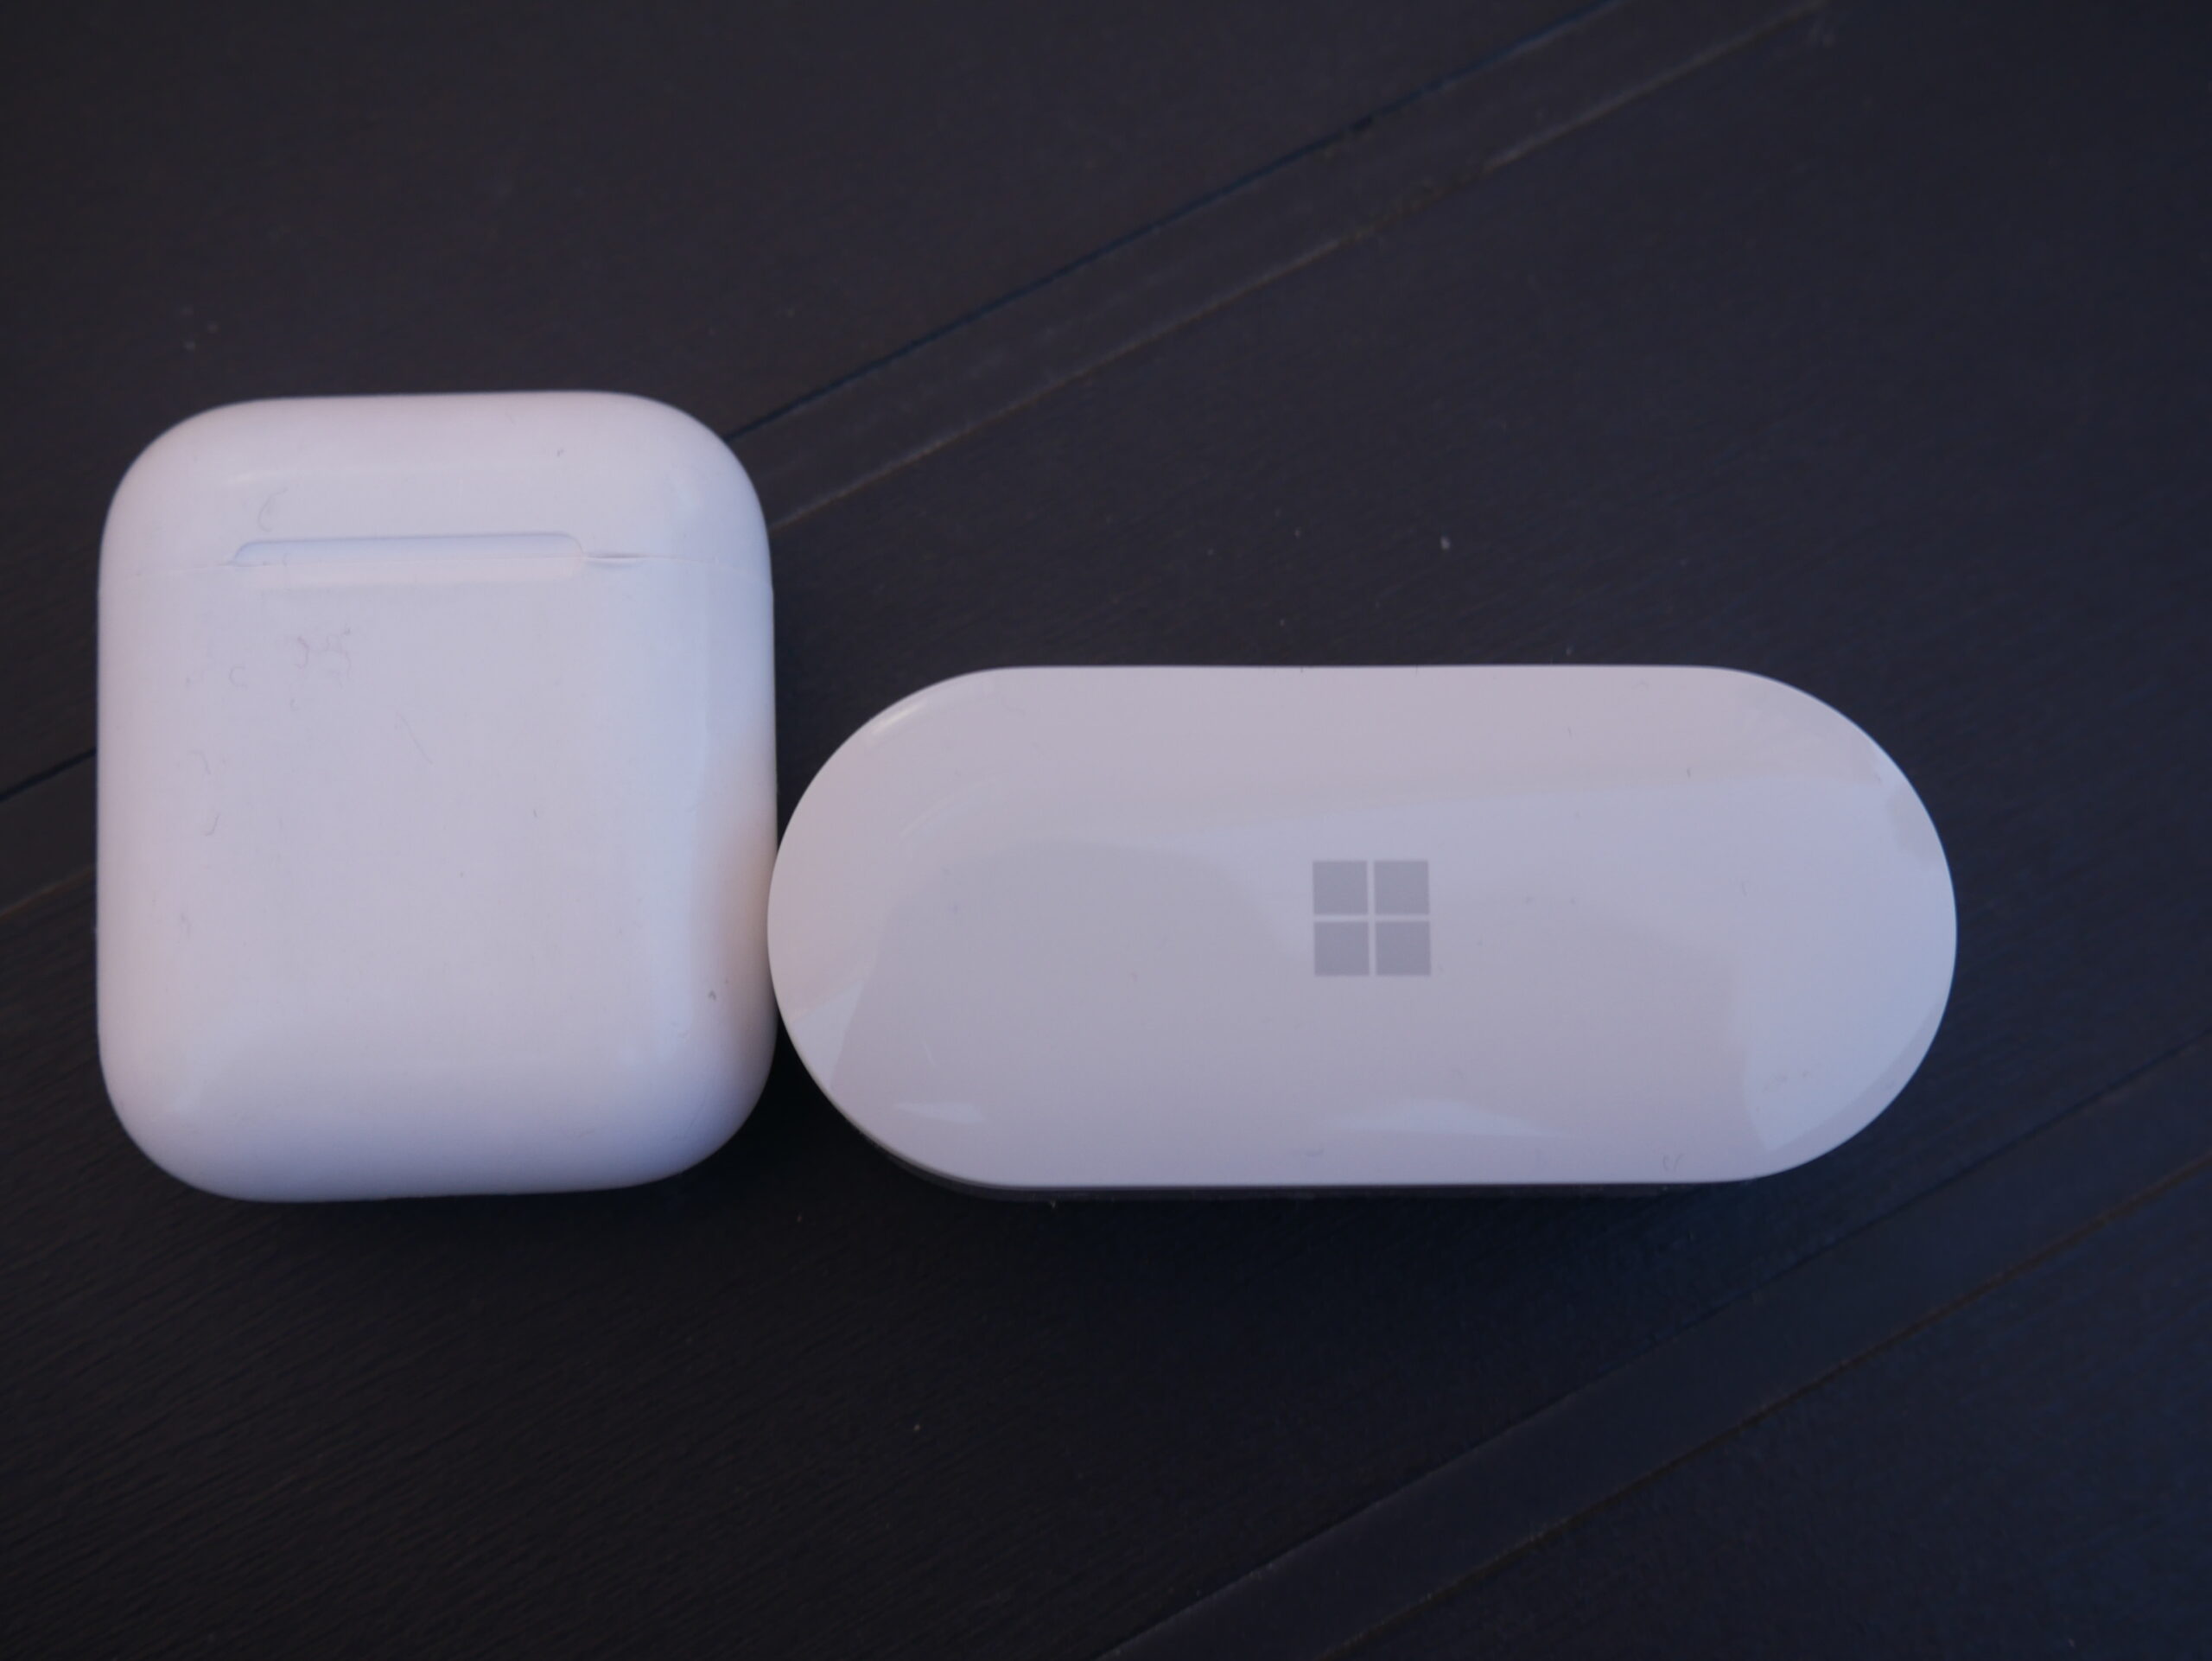 Surface Earbuds y Airpods caja